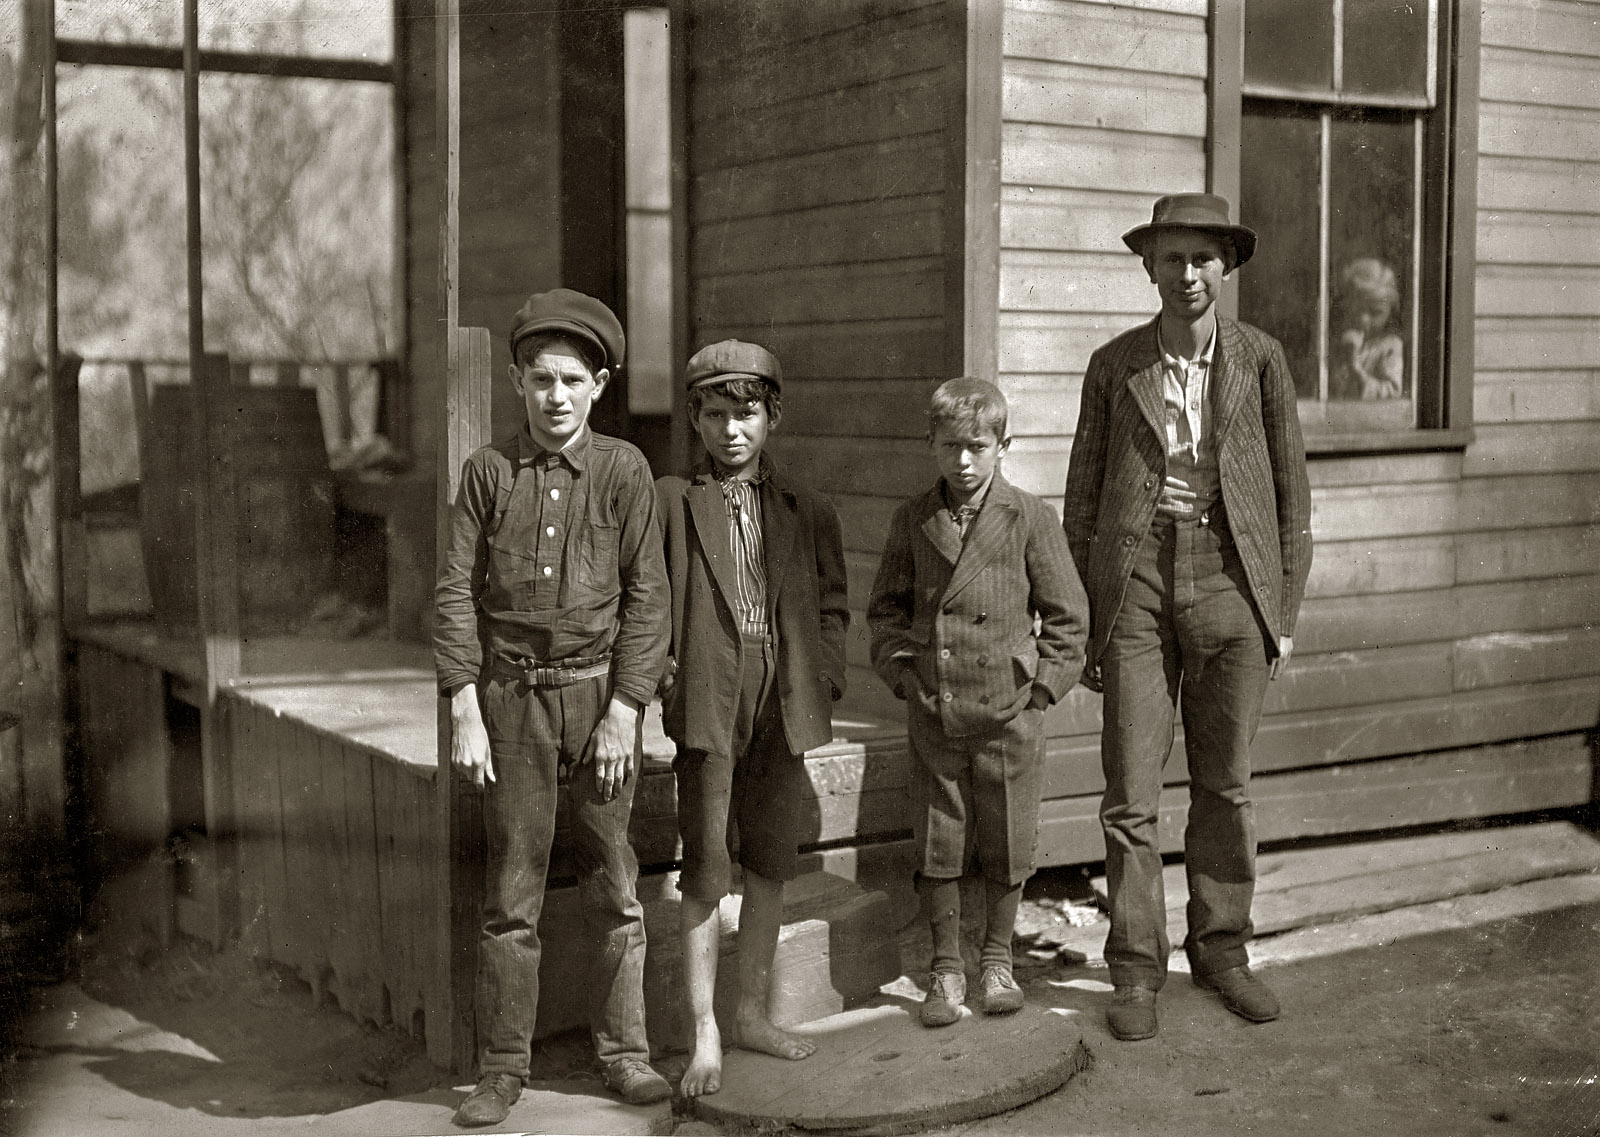 October 1908. Fairmont, West Virginia. "These boys (and one other small one) and their father work in Monongah Glass Works. Father gets $1.75 a day, one boy $1.25 a day, four get 80 cents. Total $6.20 a day. Live in a tumble-down house. What is the trouble?" Photo and caption by Lewis Wickes Hine. View full size.